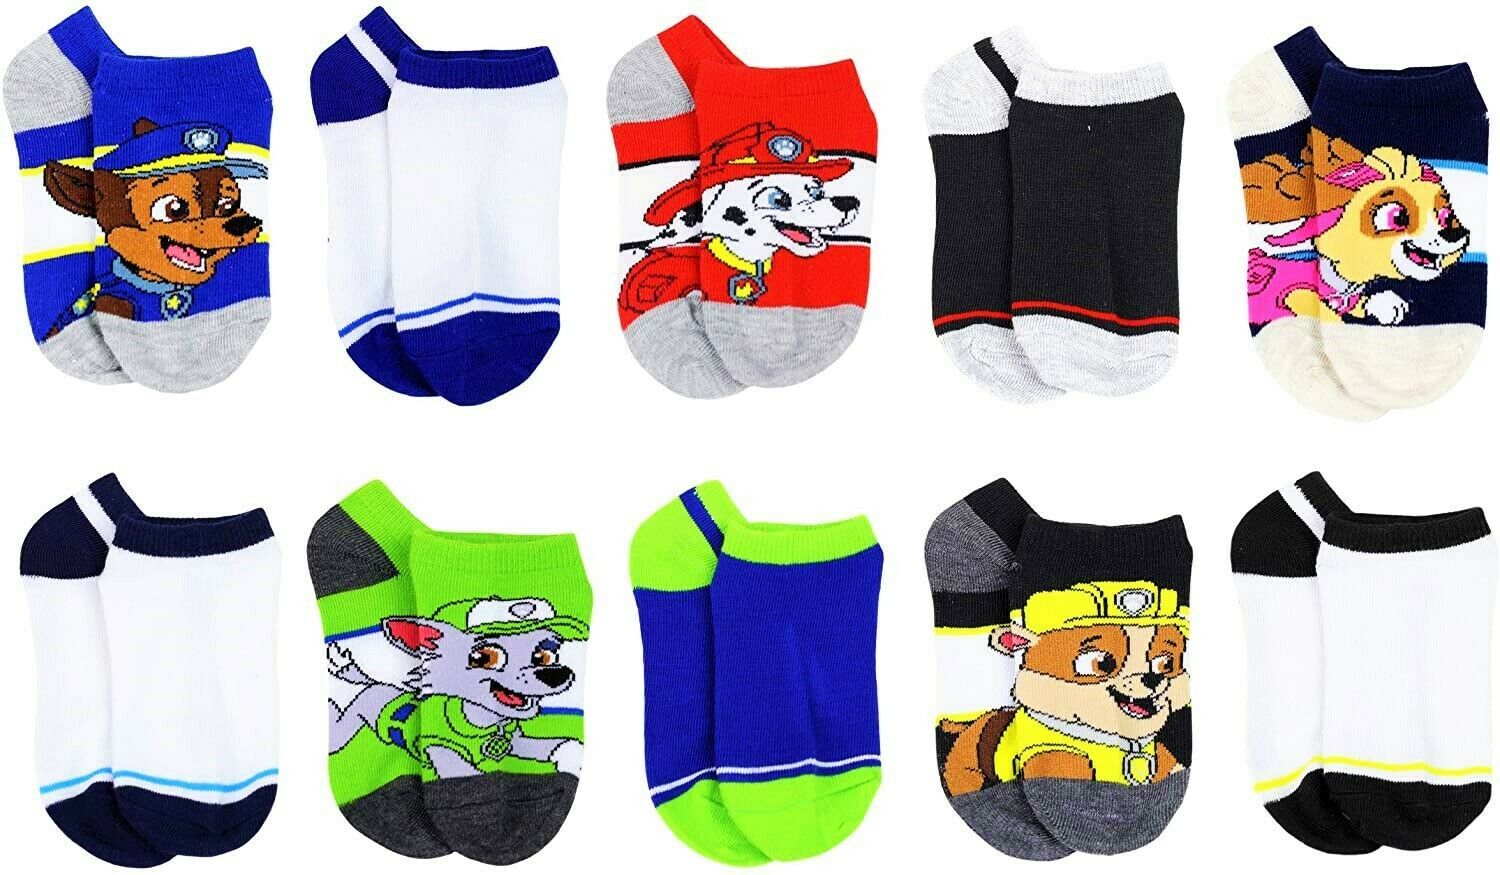 Paw Patrol Chase & Marshall 10-Pack Low Socks Boys Age 2-4 (Shoe Size